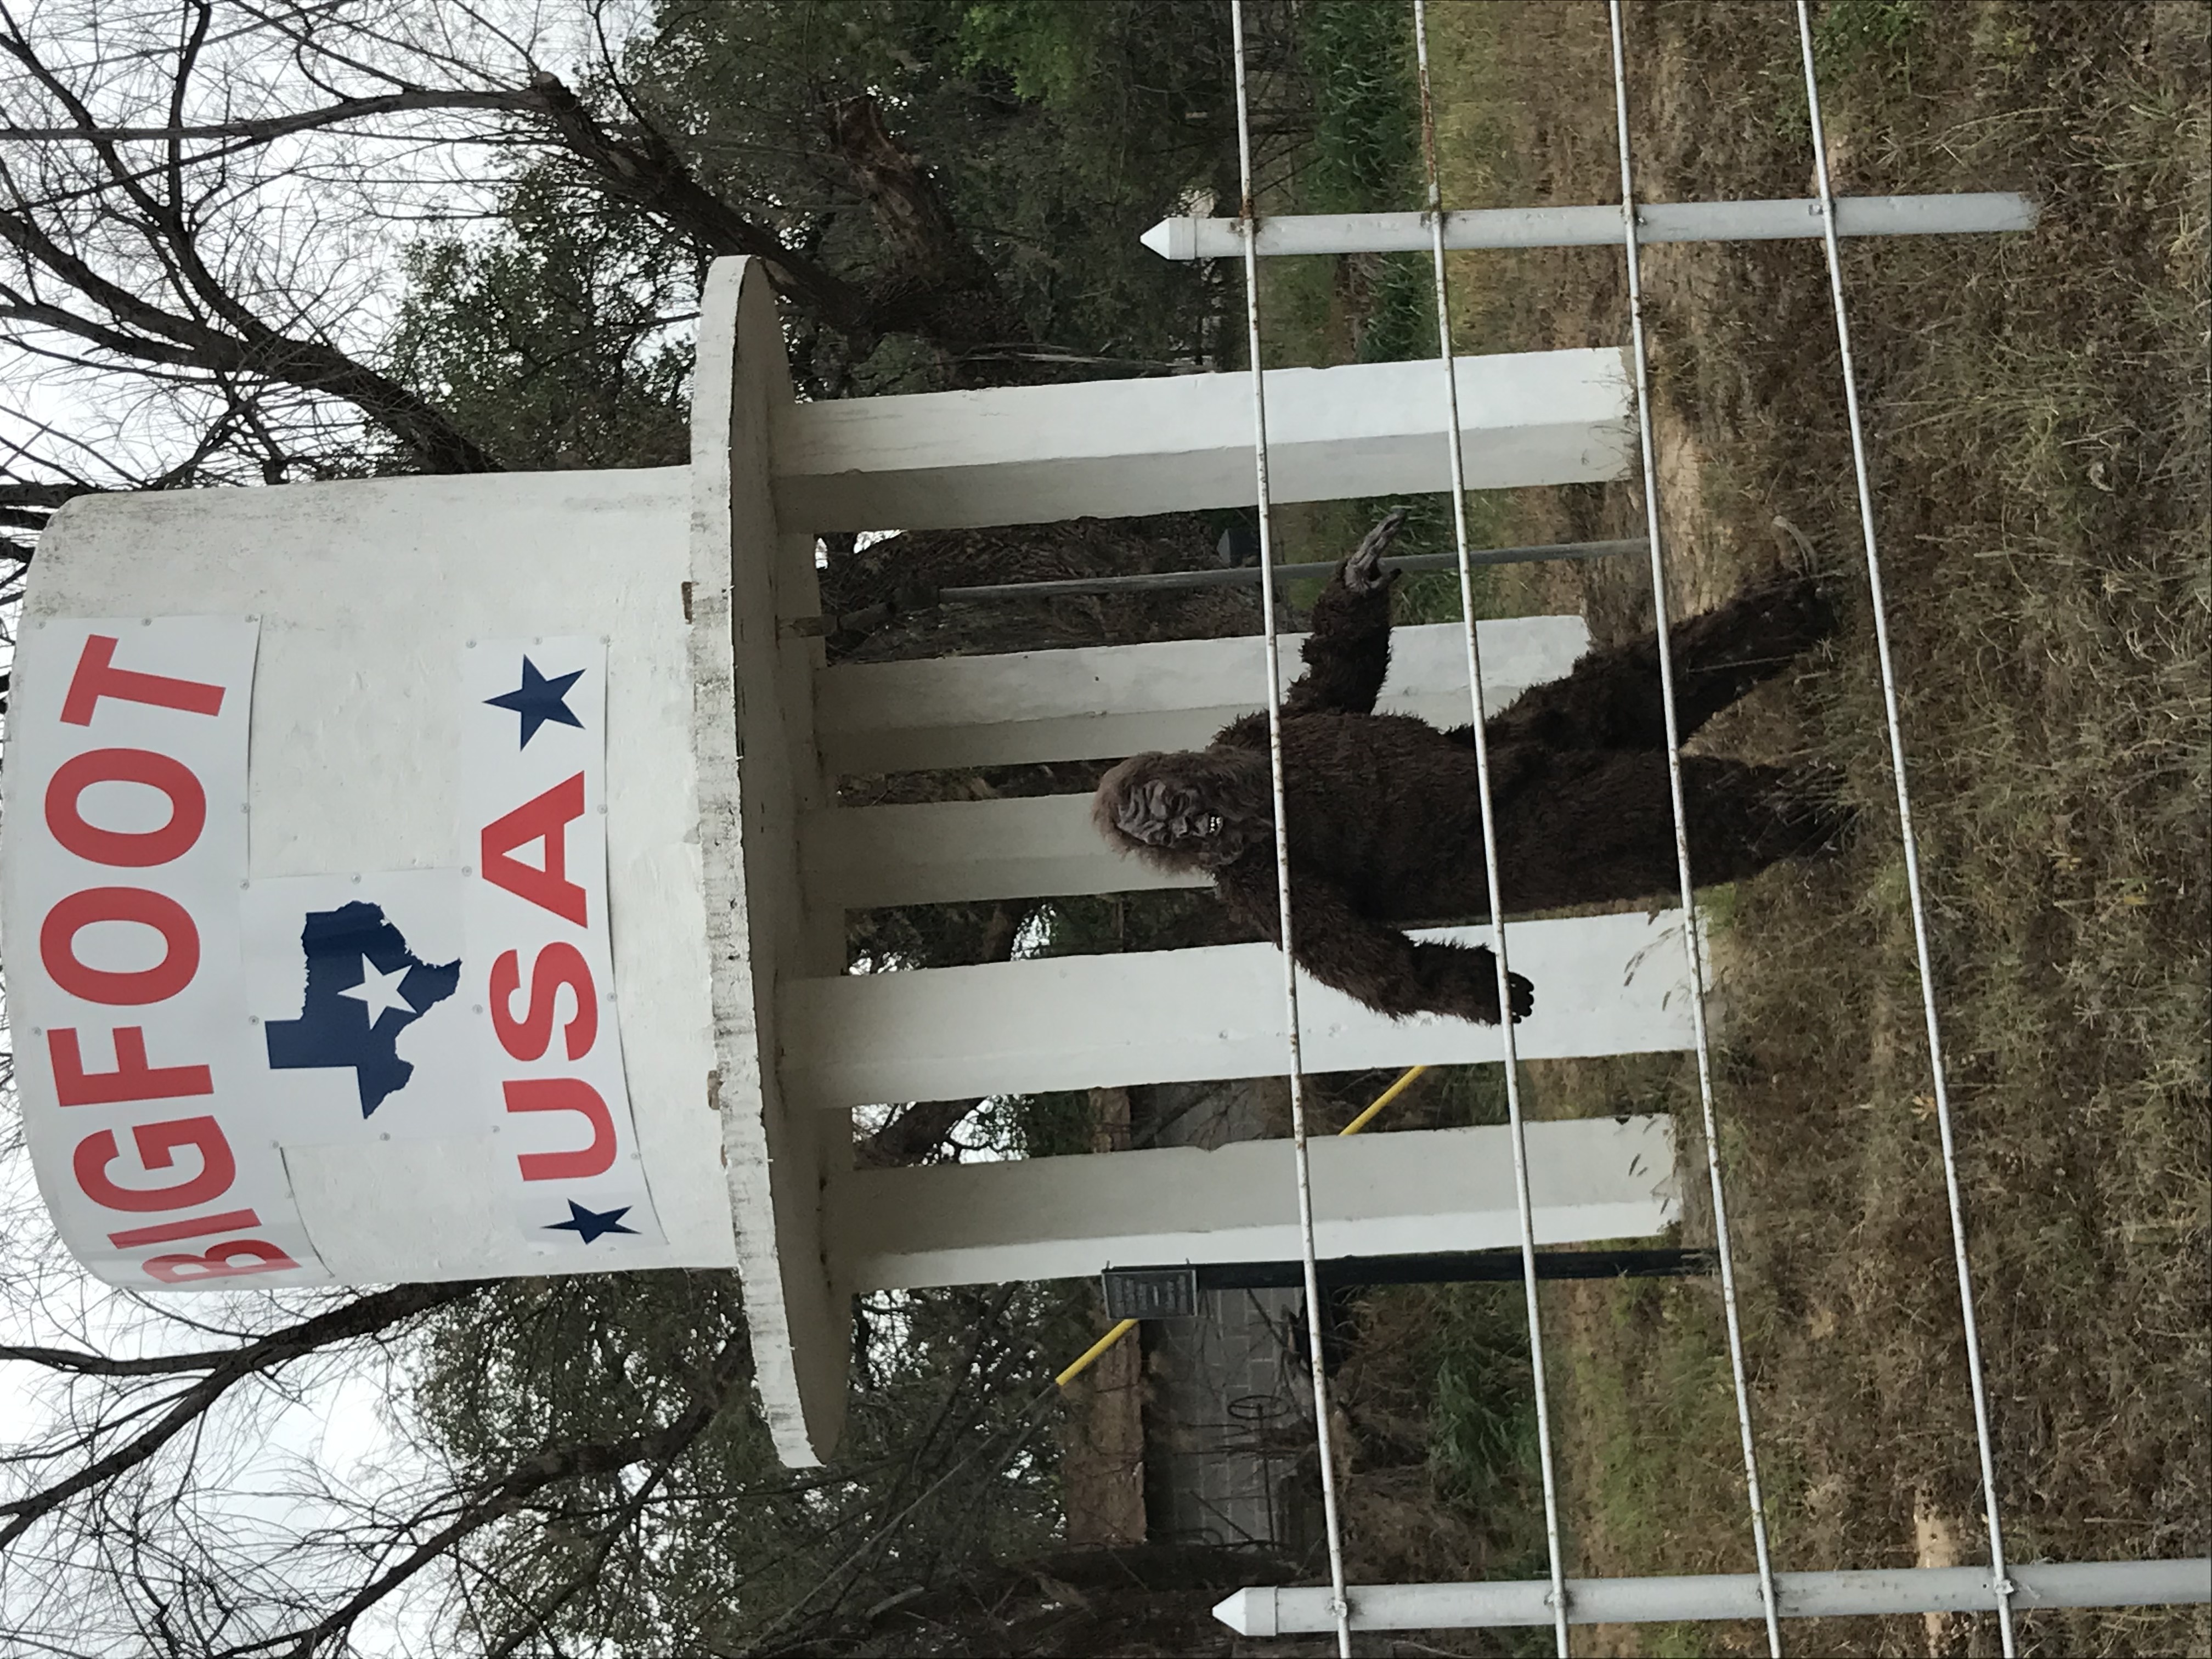 A Sasquatch living it up in Bigfoot Texas, in front of a water tower.